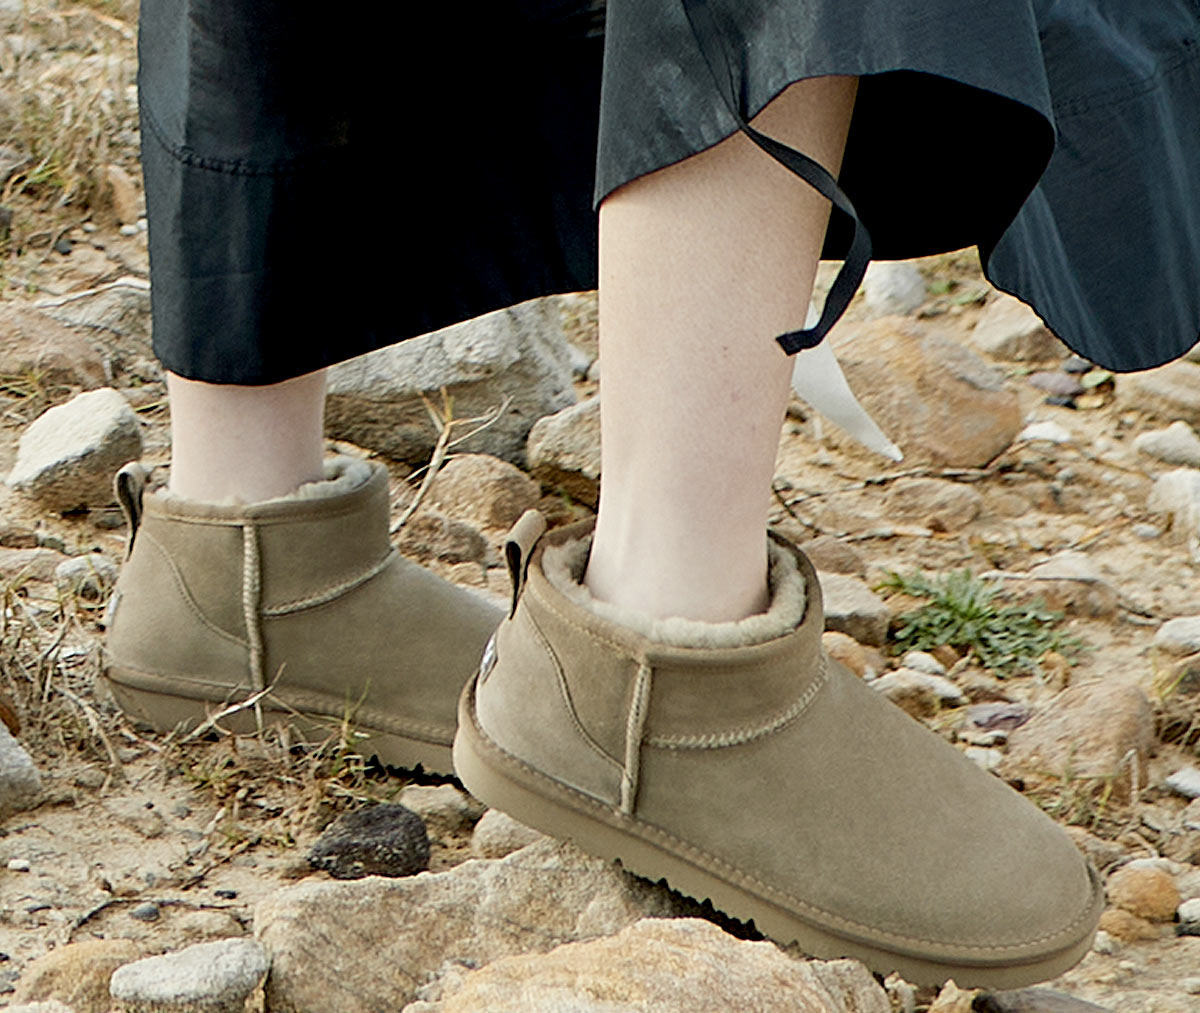 UGG Boots are Iconic Product of Australia